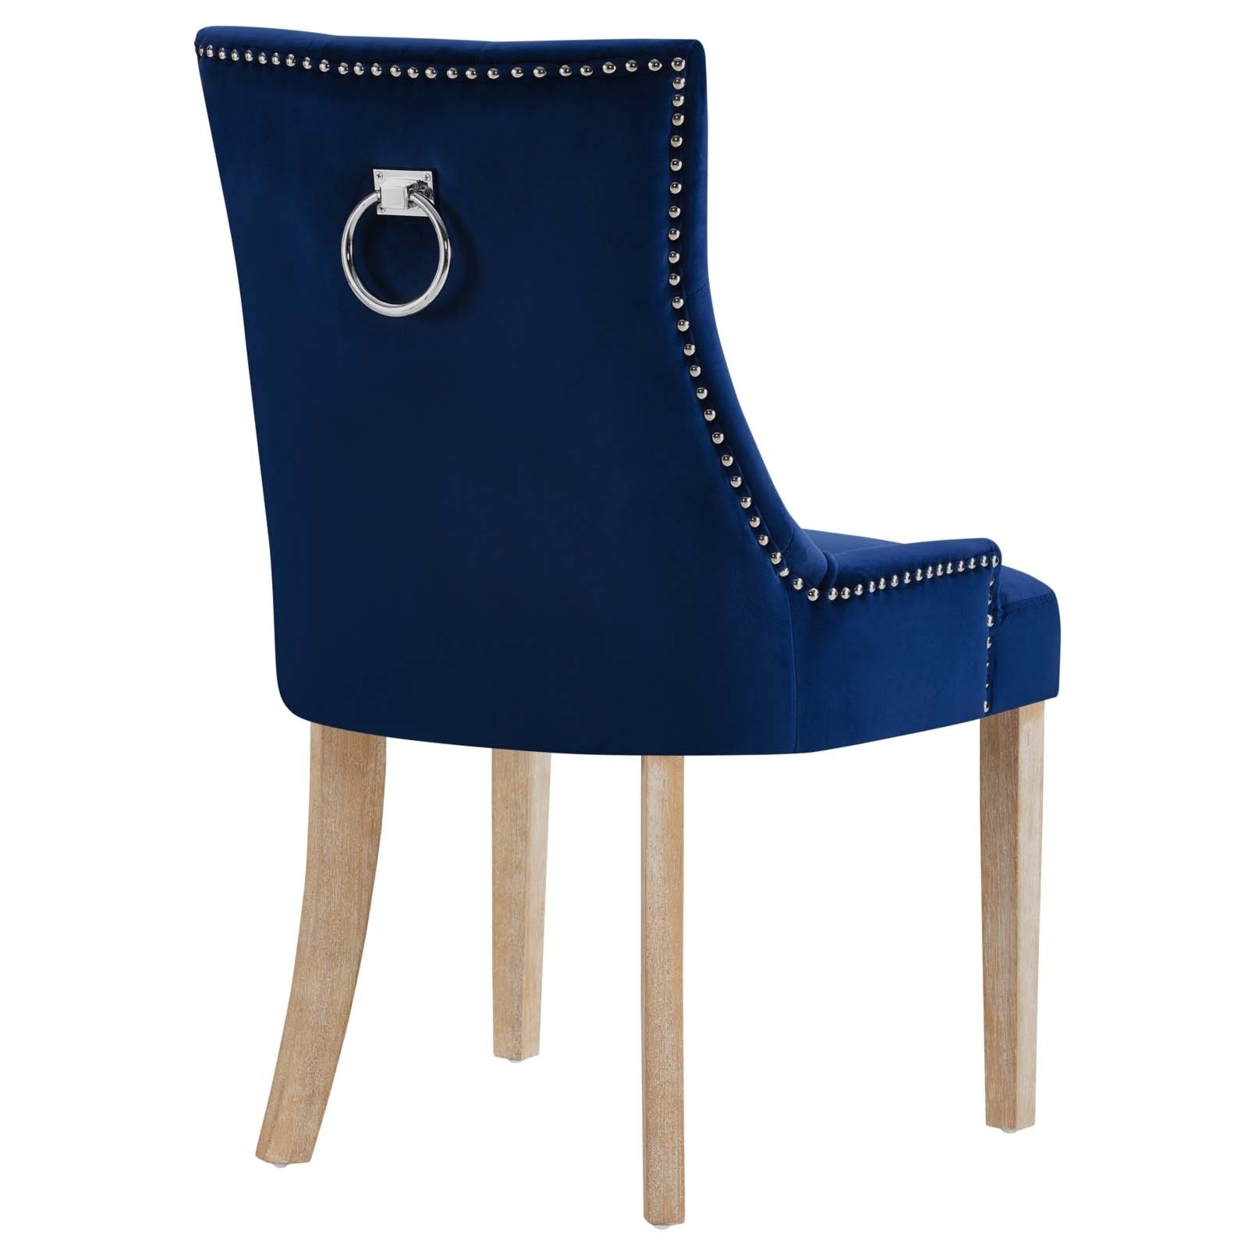 Pose Upholstered Fabric Dining Chair In Navy Blue